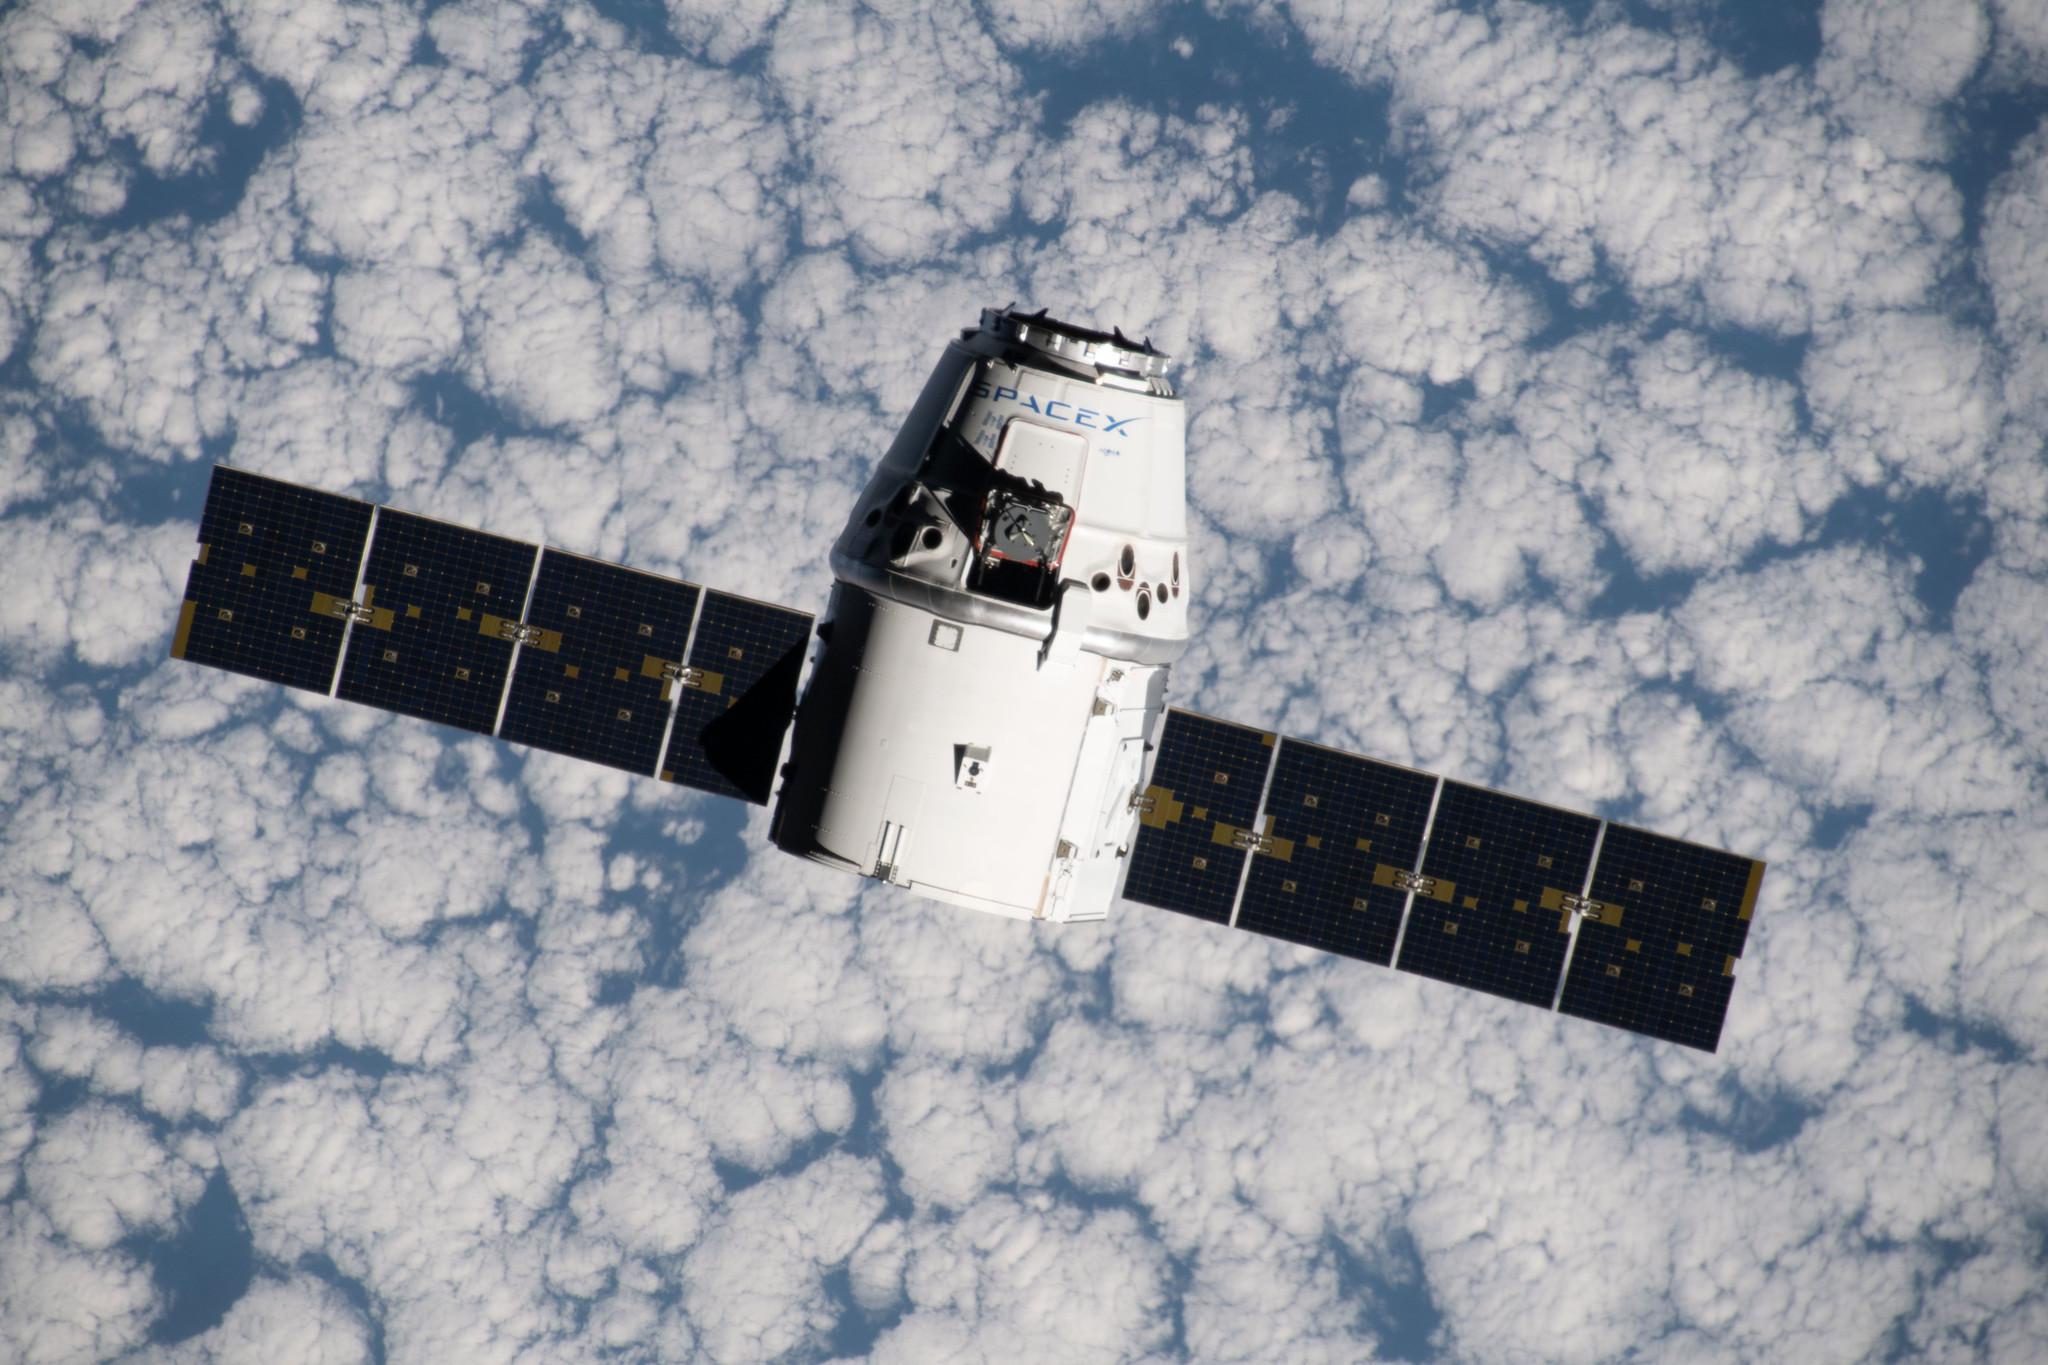 SpaceX Dragon spacecraft approaches the International Space Station July 27, 2019